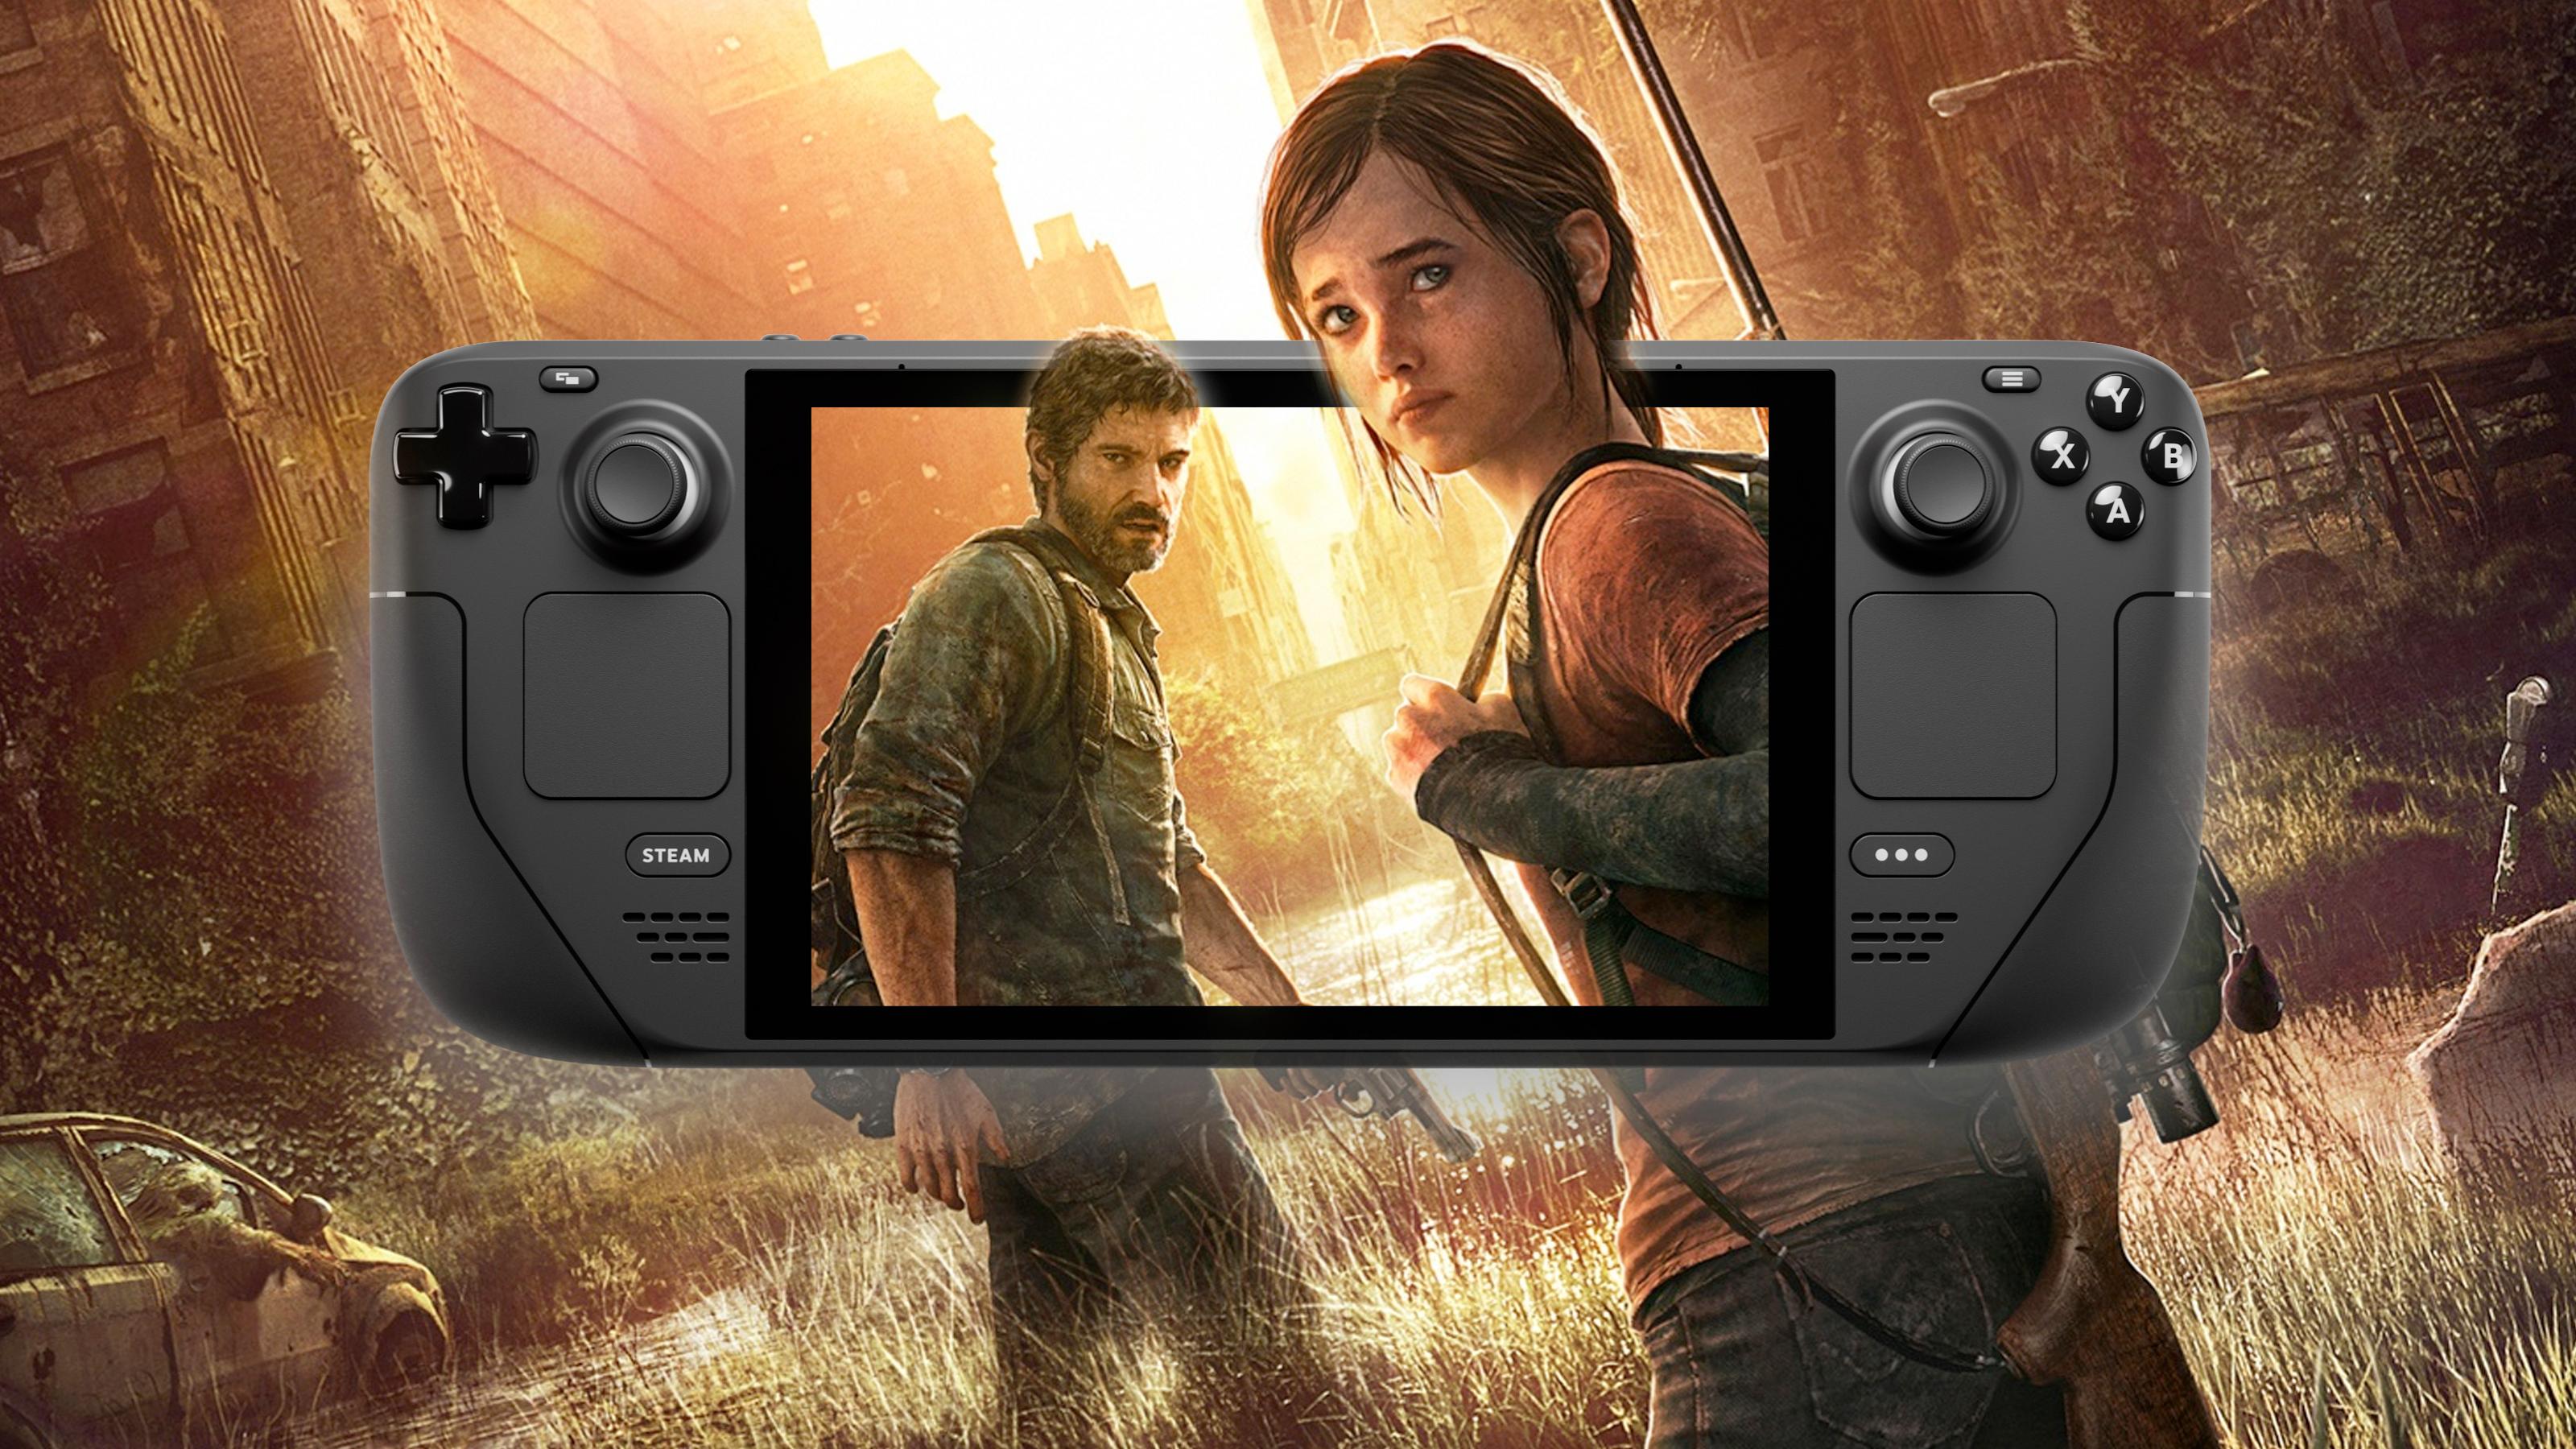 The Last Of Us Part 1 FIXED on Steam Deck? - Should it be